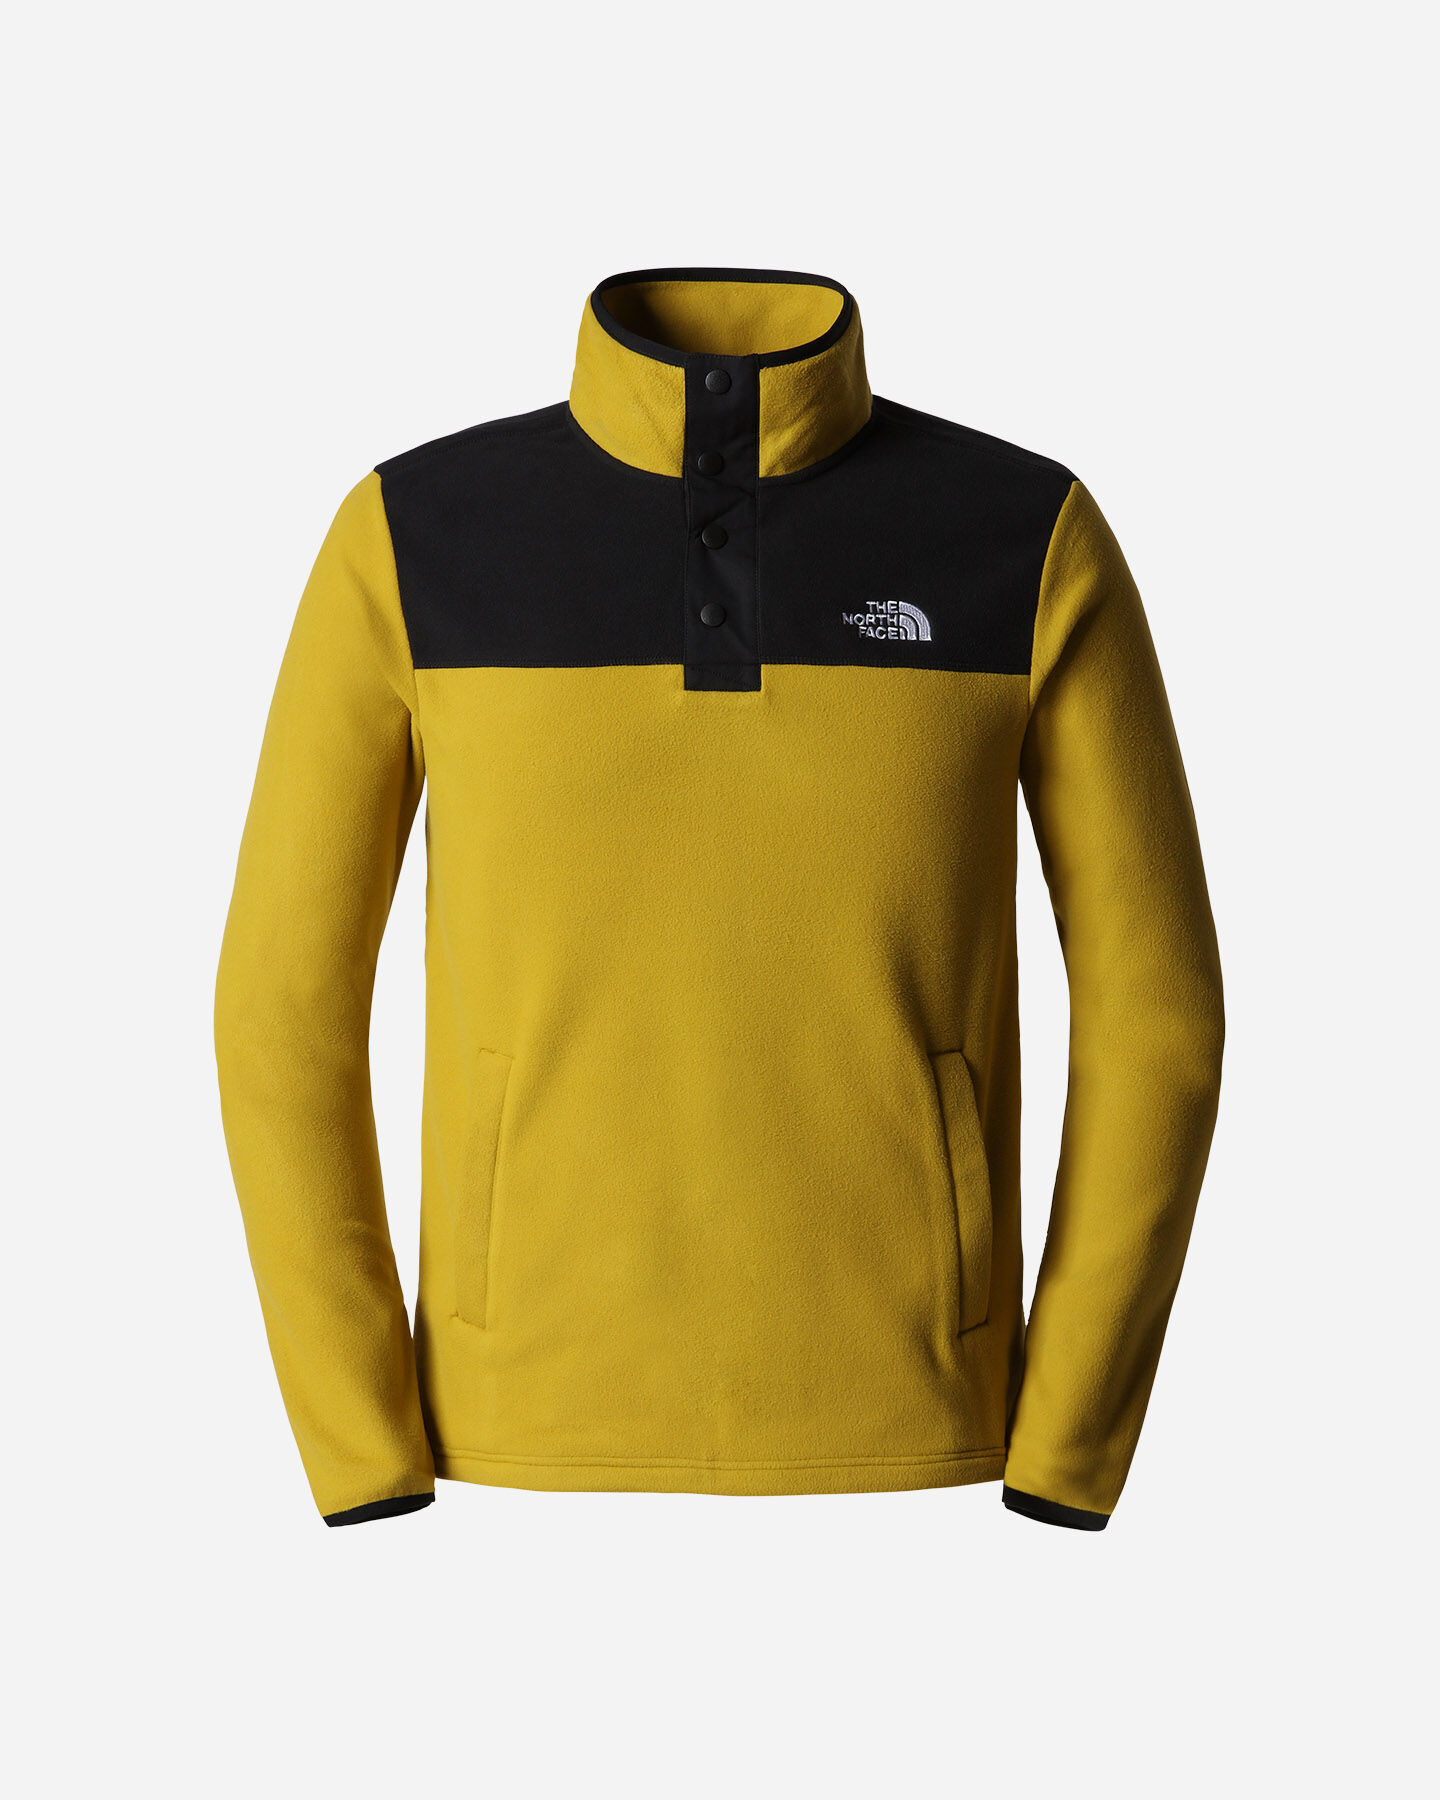  Pile THE NORTH FACE HOMESAFE M S5474706|76S|XS scatto 0